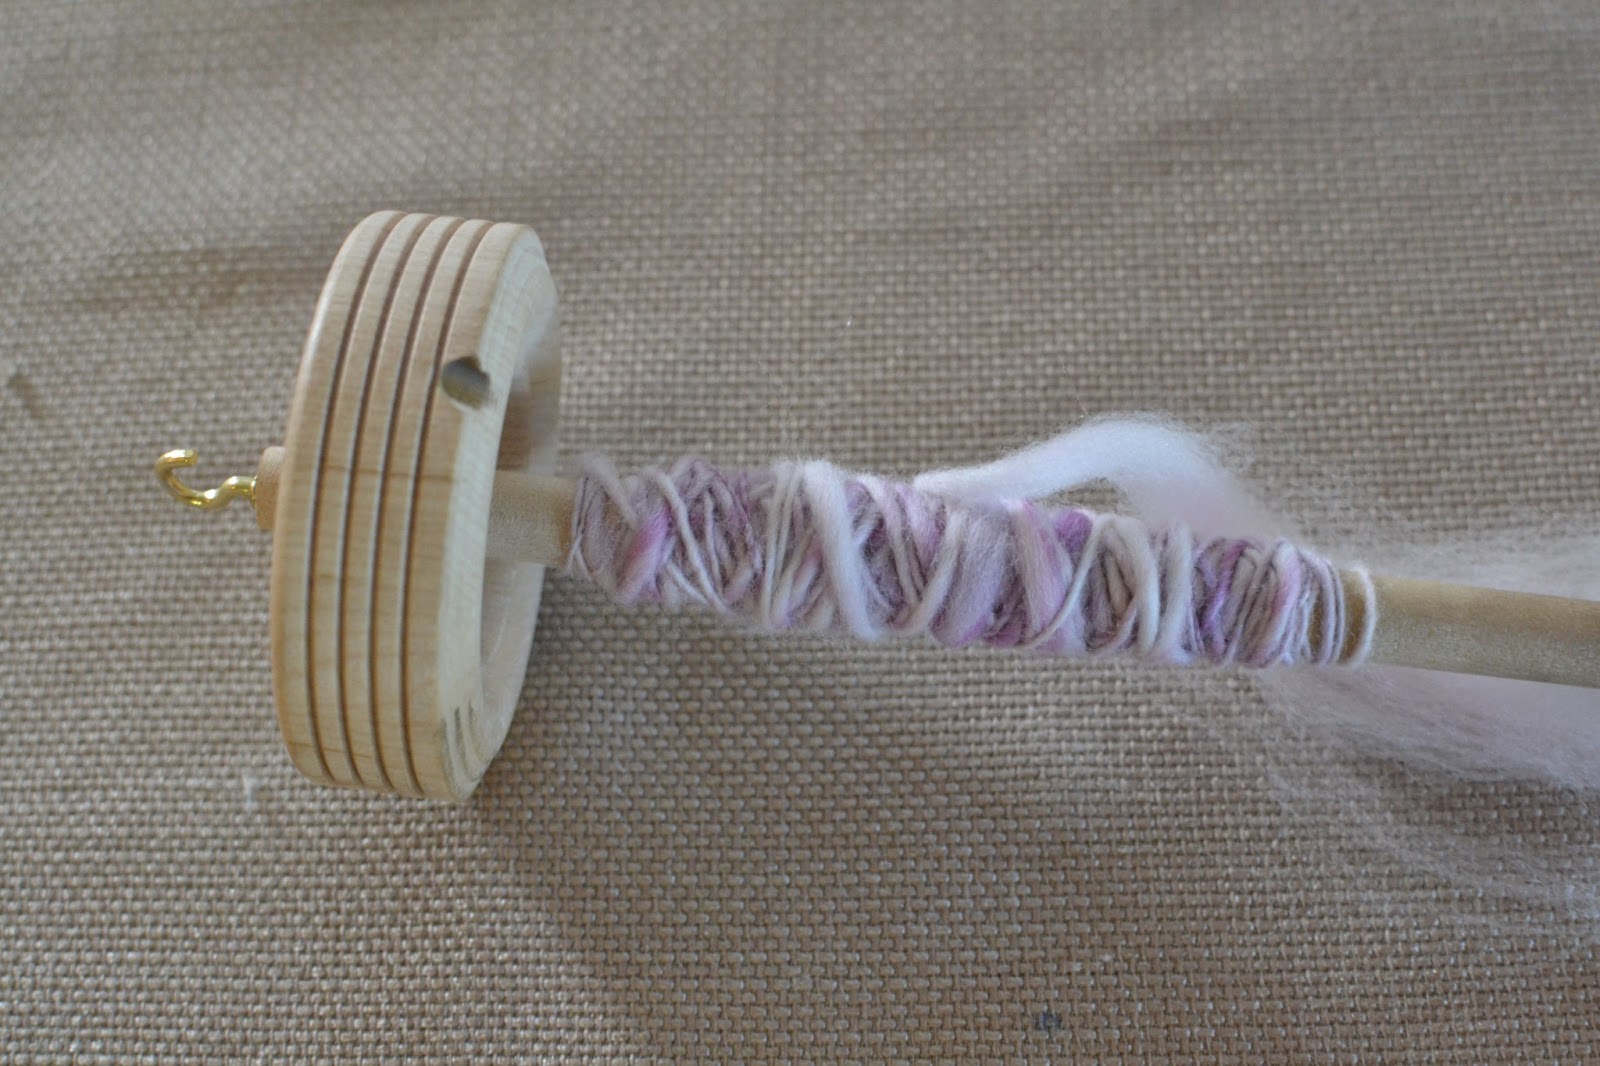 Getting Started on a Drop Spindle